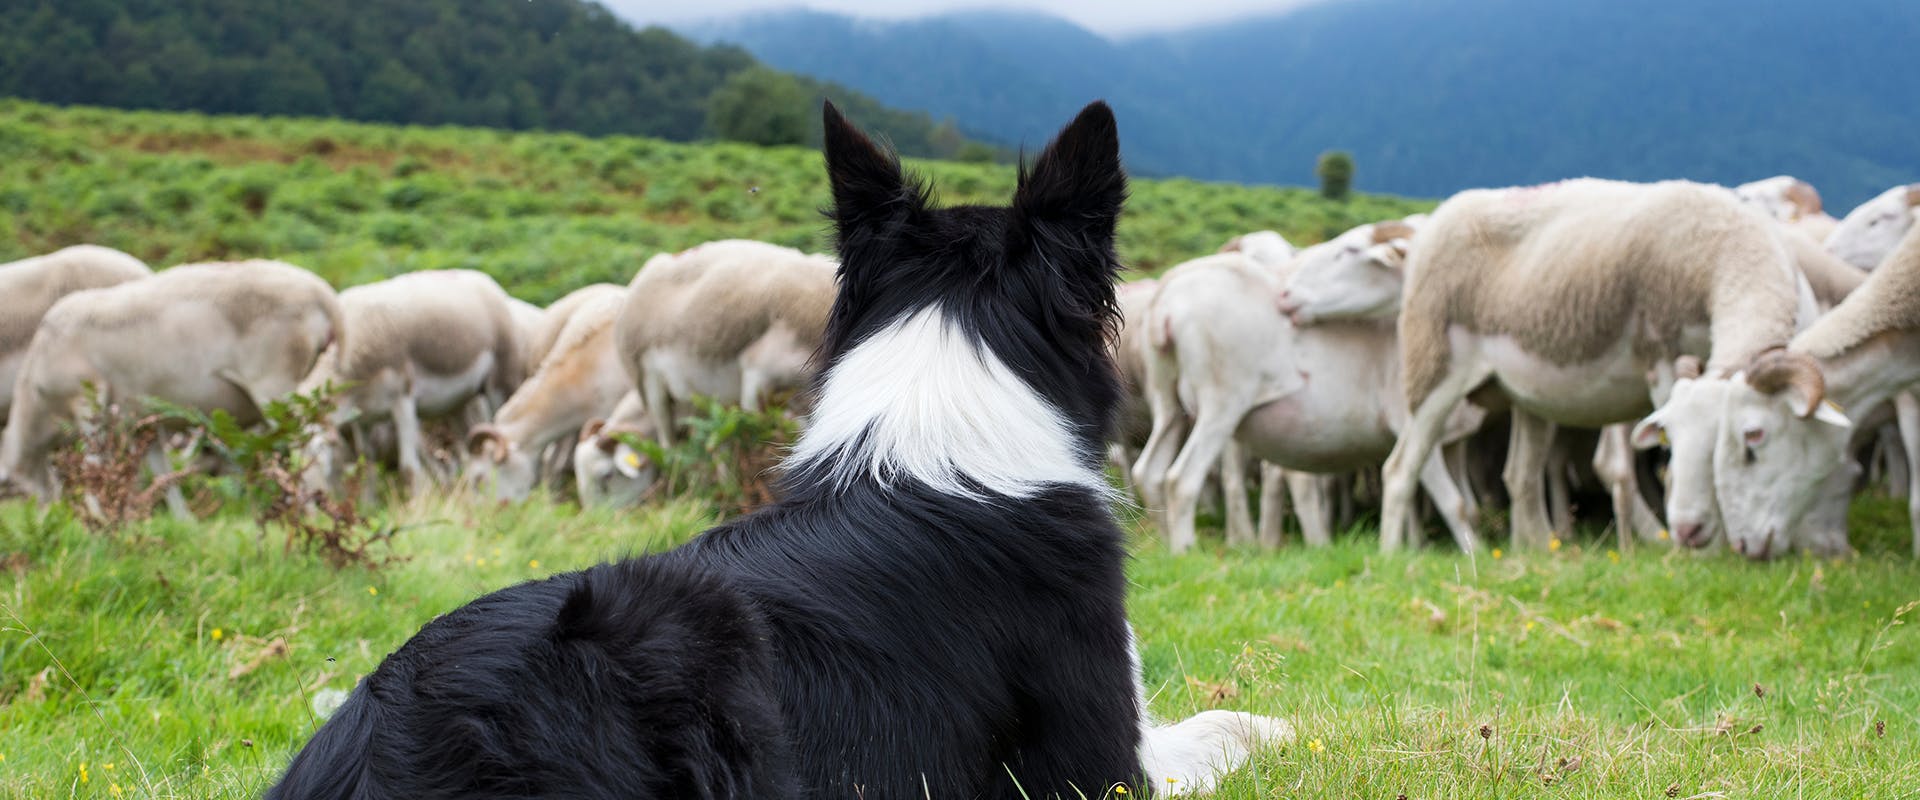 The back of a Collie dog sitting in front of a herd of sheep